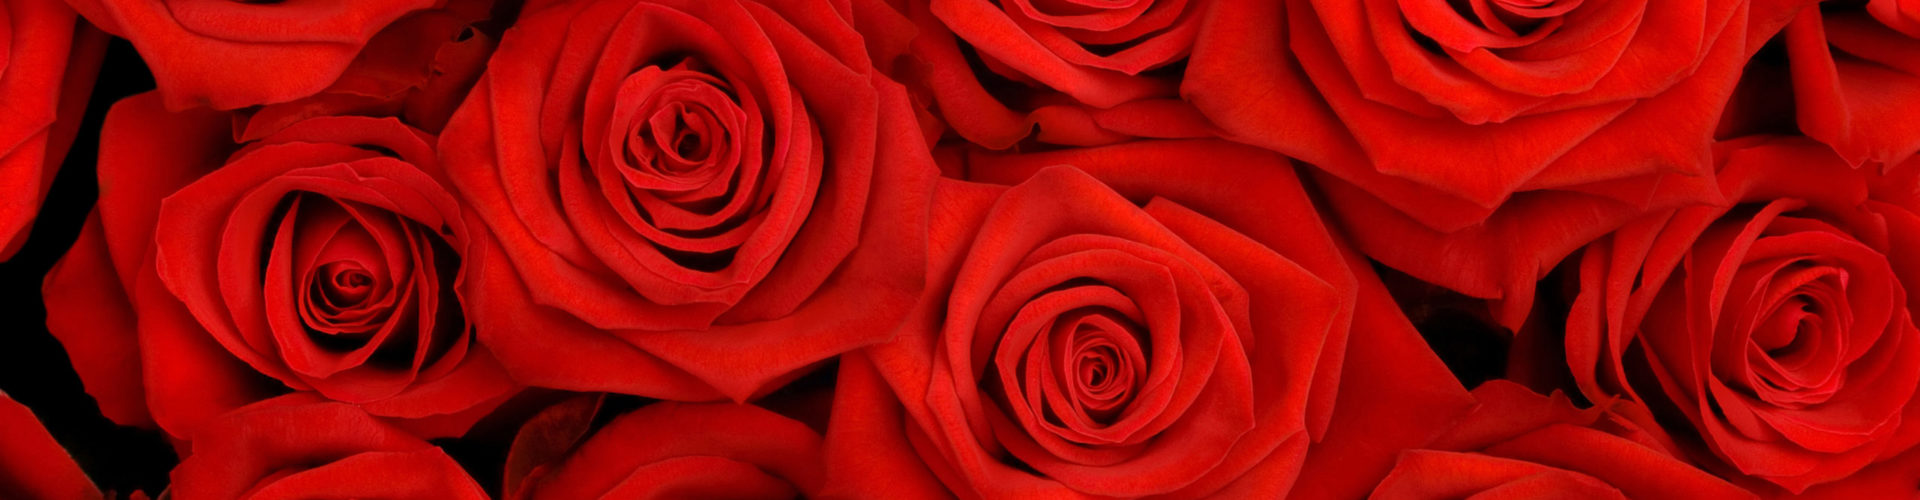 red roses red roses red roses background 1 scaled 1